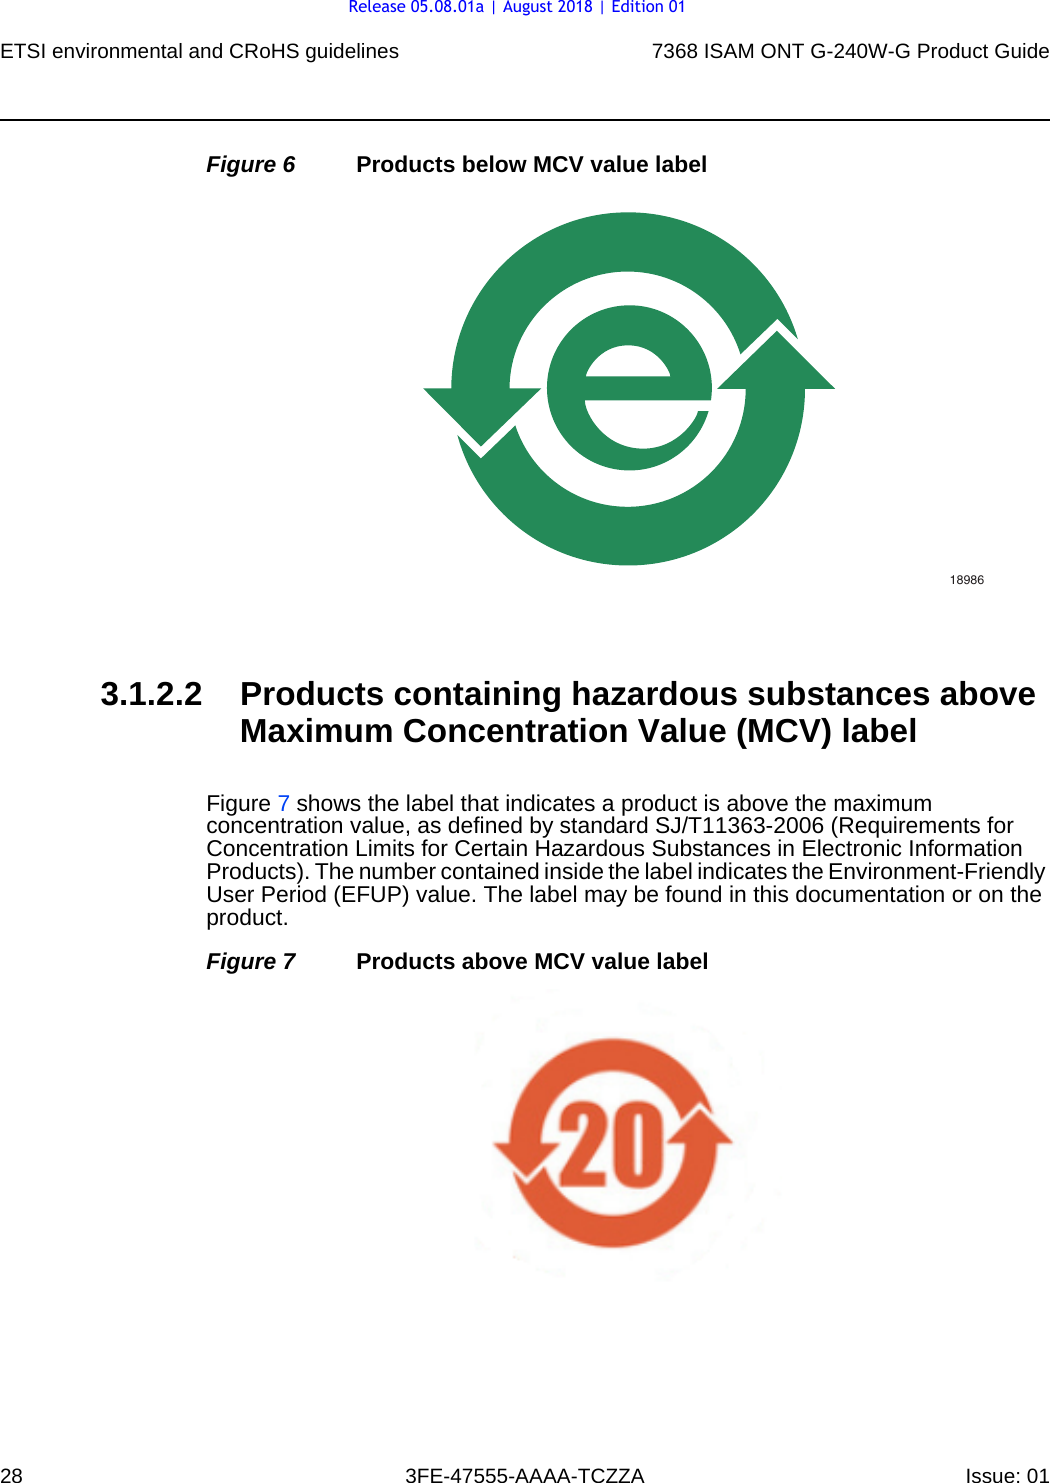 ETSI environmental and CRoHS guidelines287368 ISAM ONT G-240W-G Product Guide3FE-47555-AAAA-TCZZA Issue: 01 Figure 6 Products below MCV value label3.1.2.2 Products containing hazardous substances above Maximum Concentration Value (MCV) labelFigure 7 shows the label that indicates a product is above the maximum concentration value, as defined by standard SJ/T11363-2006 (Requirements for Concentration Limits for Certain Hazardous Substances in Electronic Information Products). The number contained inside the label indicates the Environment-Friendly User Period (EFUP) value. The label may be found in this documentation or on the product.Figure 7 Products above MCV value label18986Release 05.08.01a | August 2018 | Edition 01